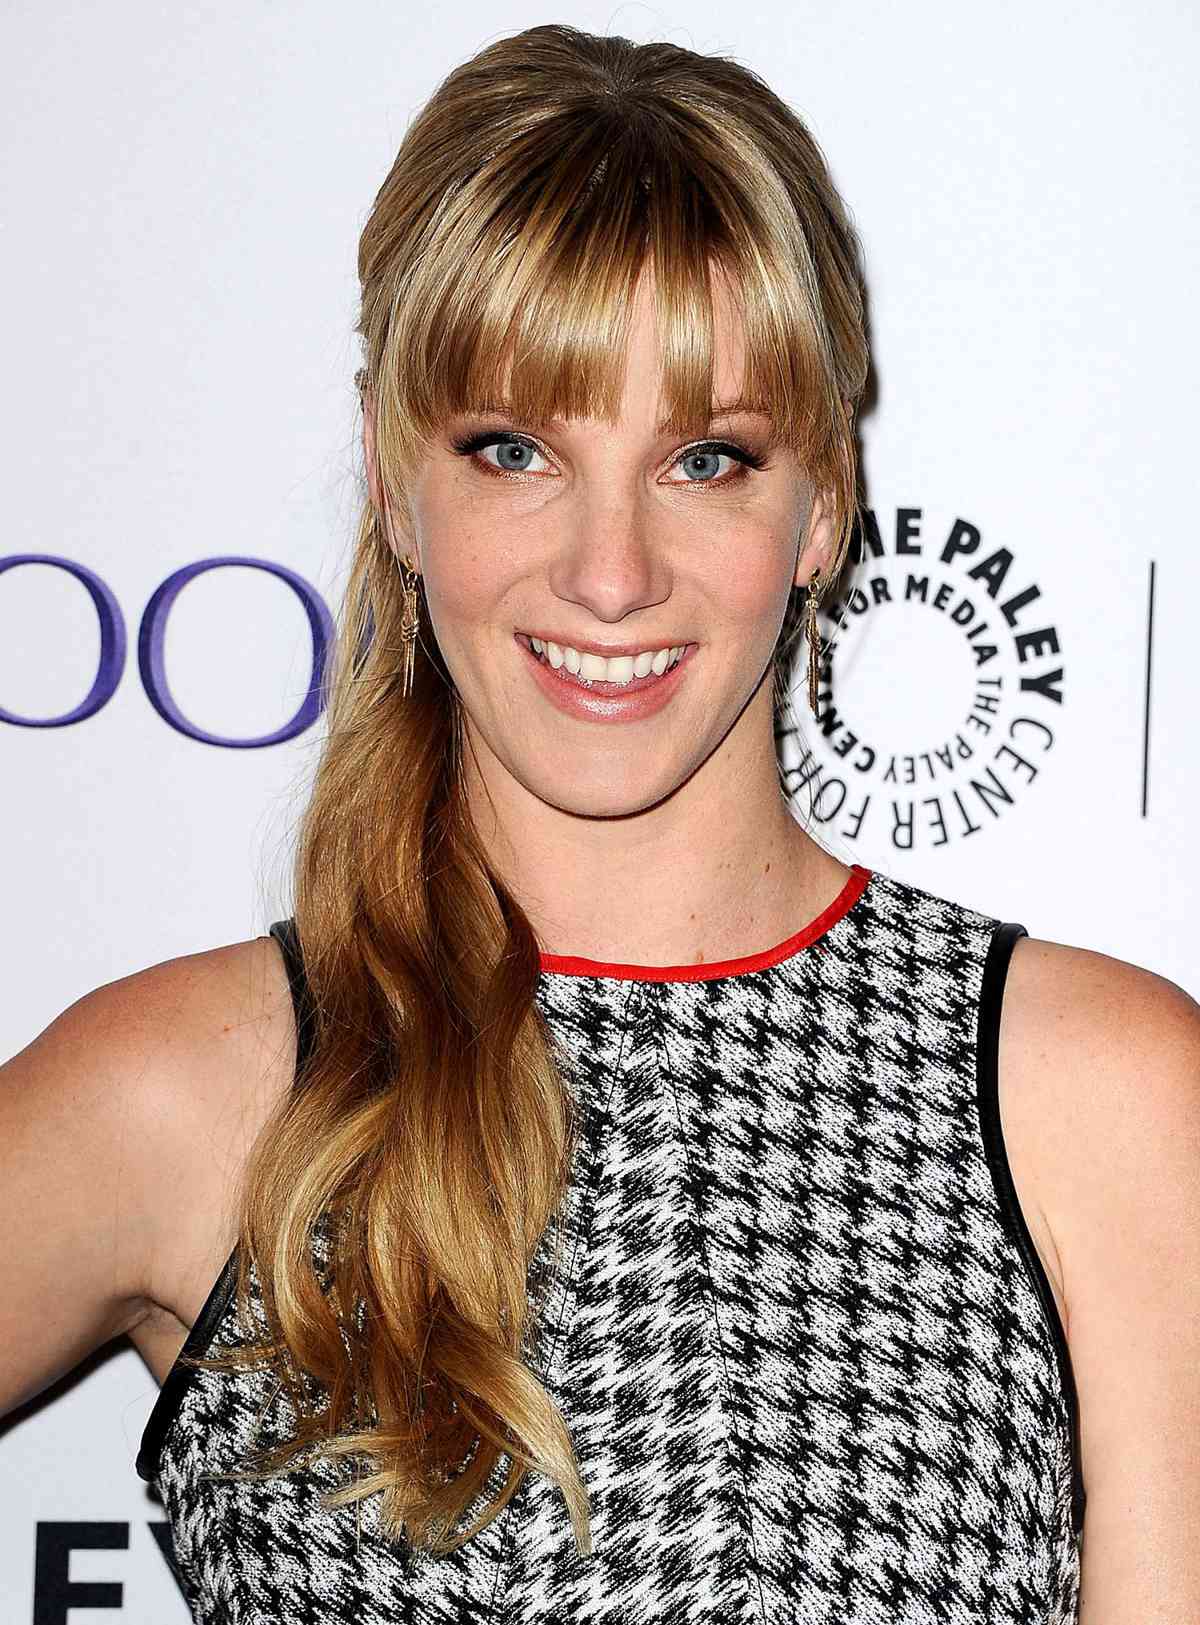 The Paley Center For Media's 32nd Annual PALEYFEST LA - "Glee"